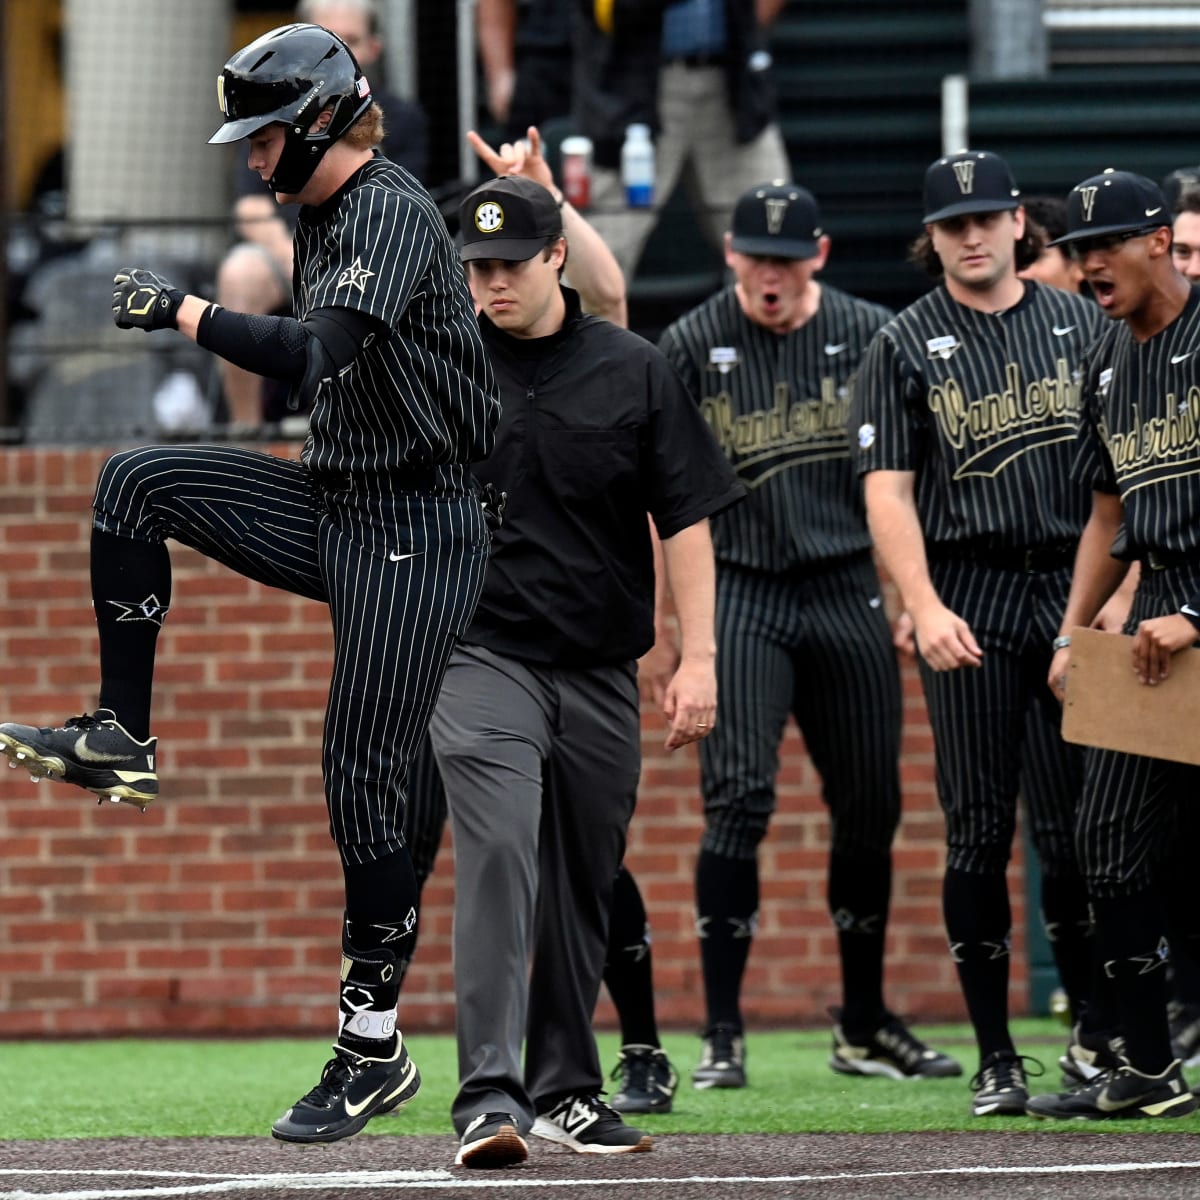 Watch Ole Miss at Vanderbilt: Stream college baseball live, TV channel -  How to Watch and Stream Major League & College Sports - Sports Illustrated.